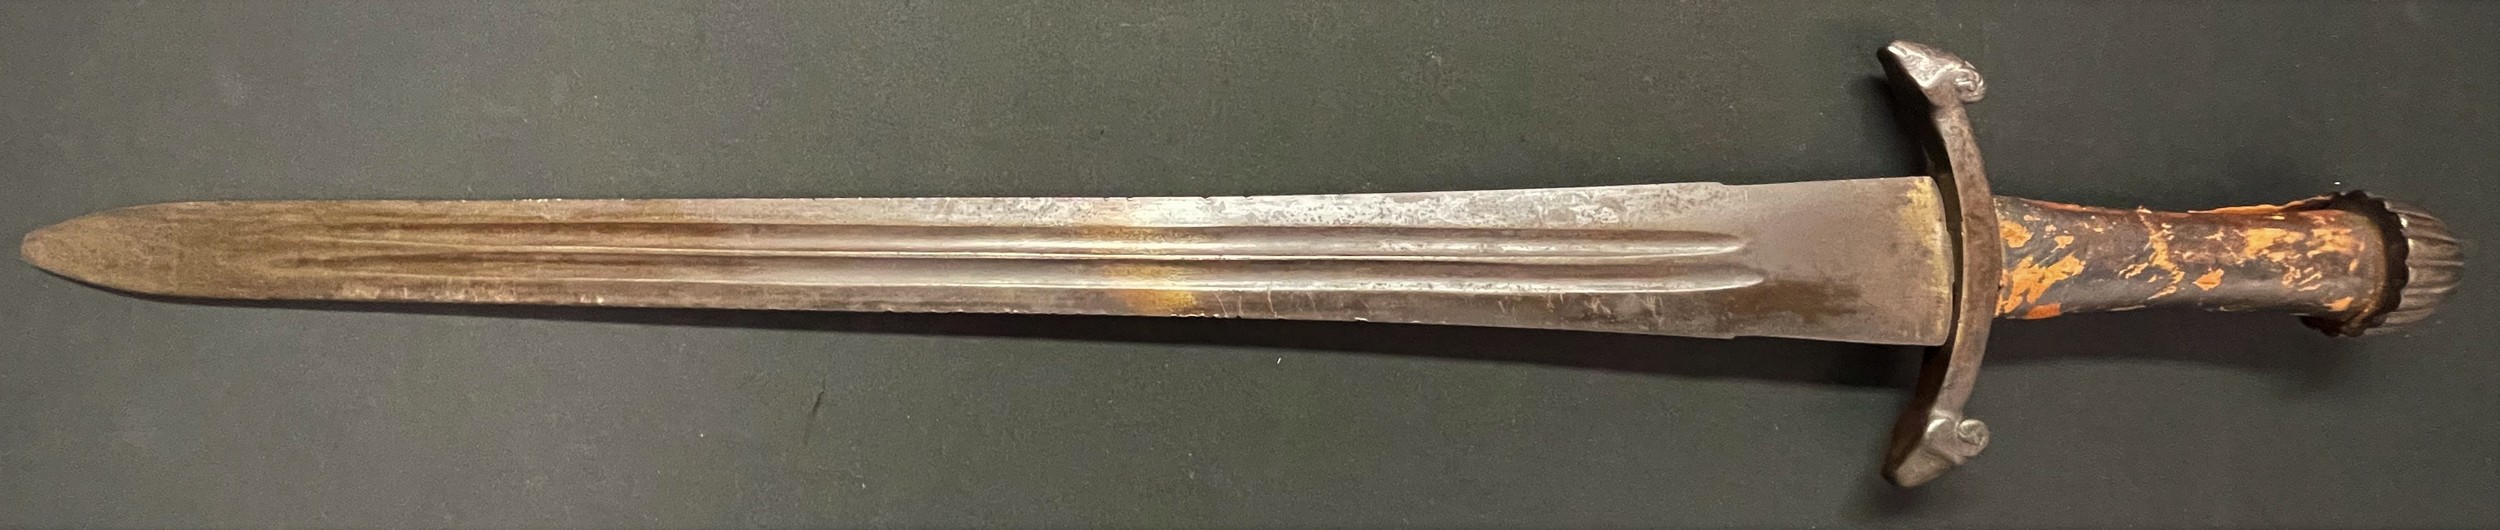 Sword by the German theatrical costume makers "Verch & Flothow, Charlottenburg" with double edged